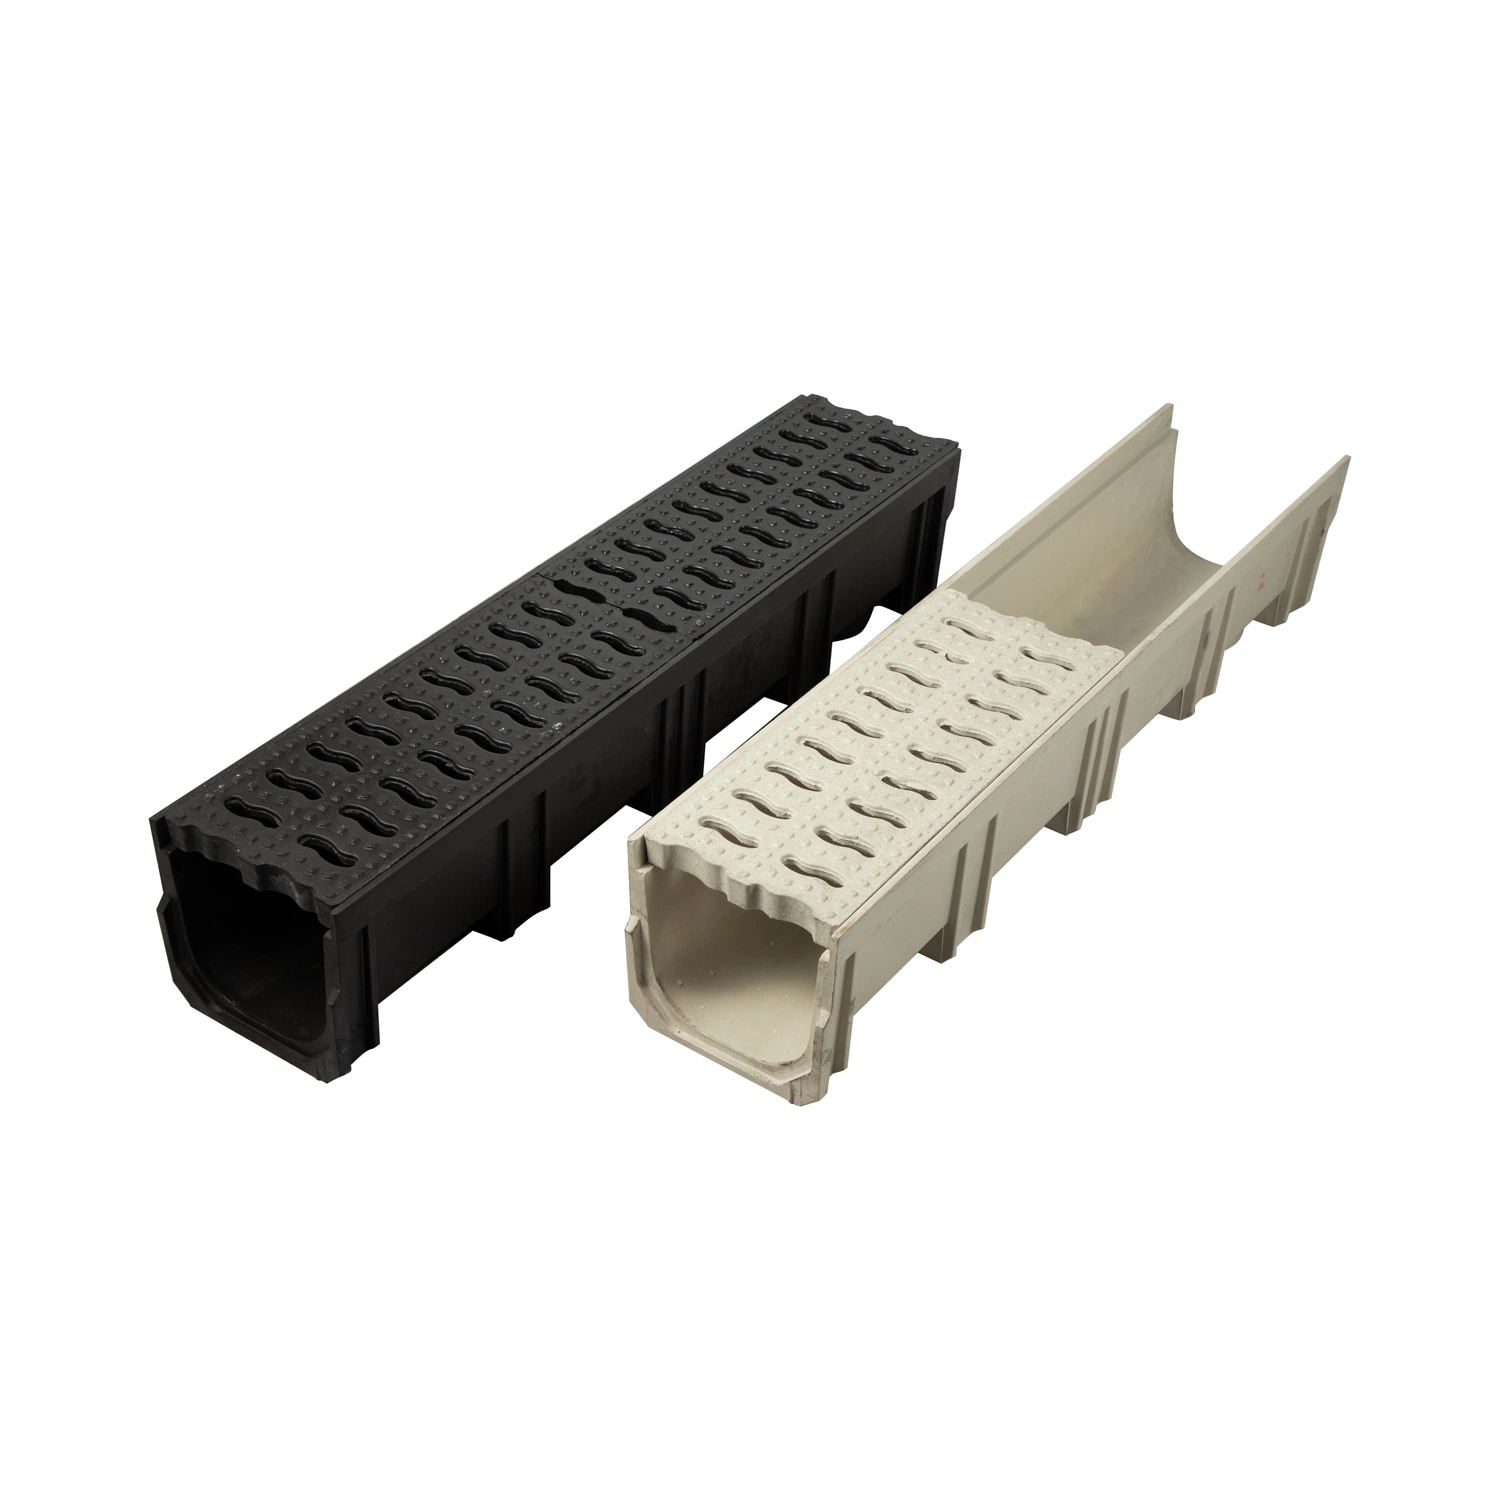 Best Selling Drainage Channel Plastic SMC Sewer Water Drainage Driveway Drainage Gutter